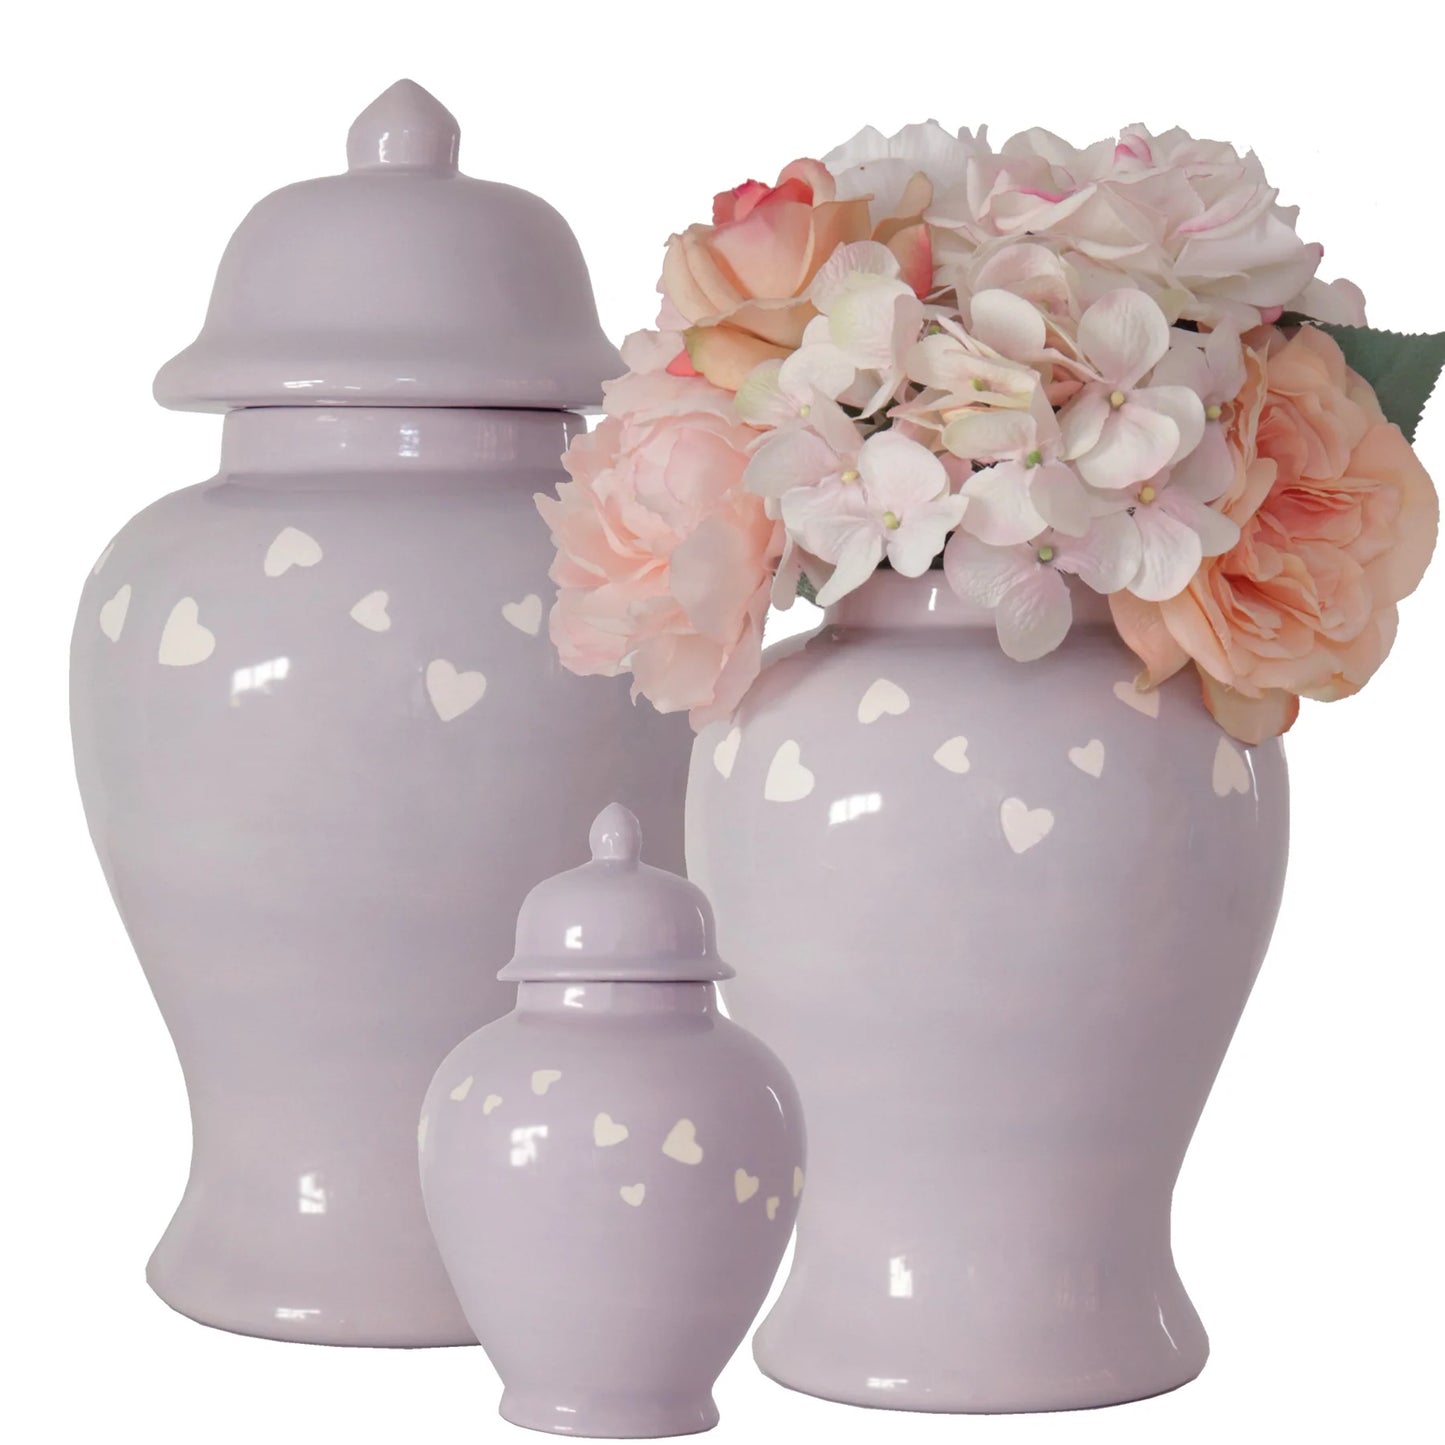 "Love is in the Air" Ginger Jars in Light Lavender